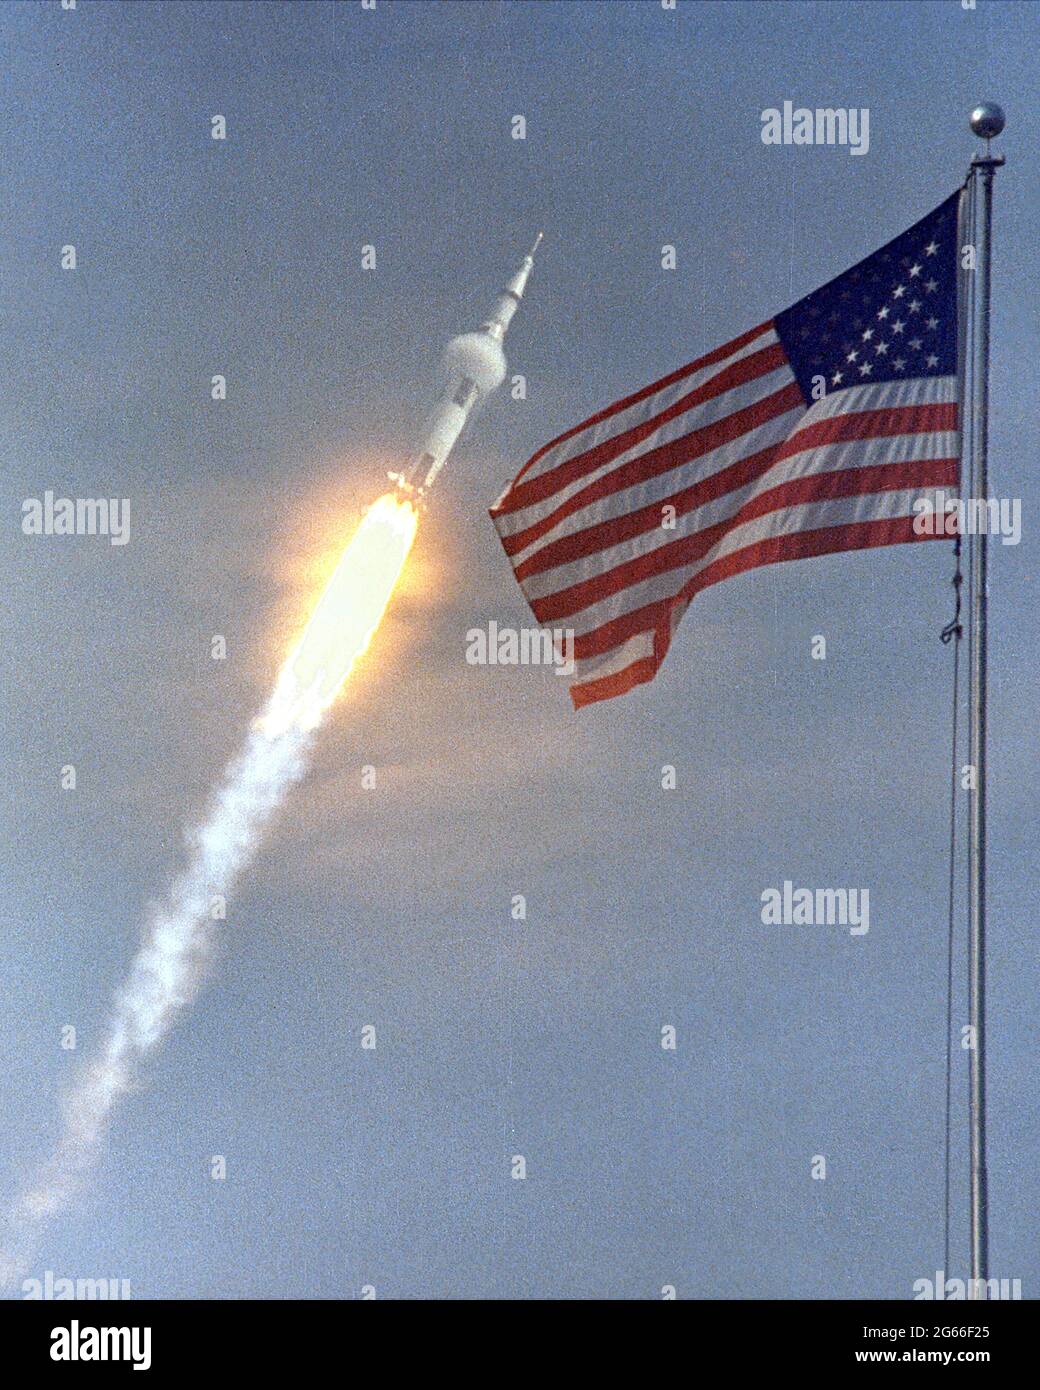 File:Apollo 11 Saturn V lifting off on July 16, 1969.jpg - Wikimedia Commons